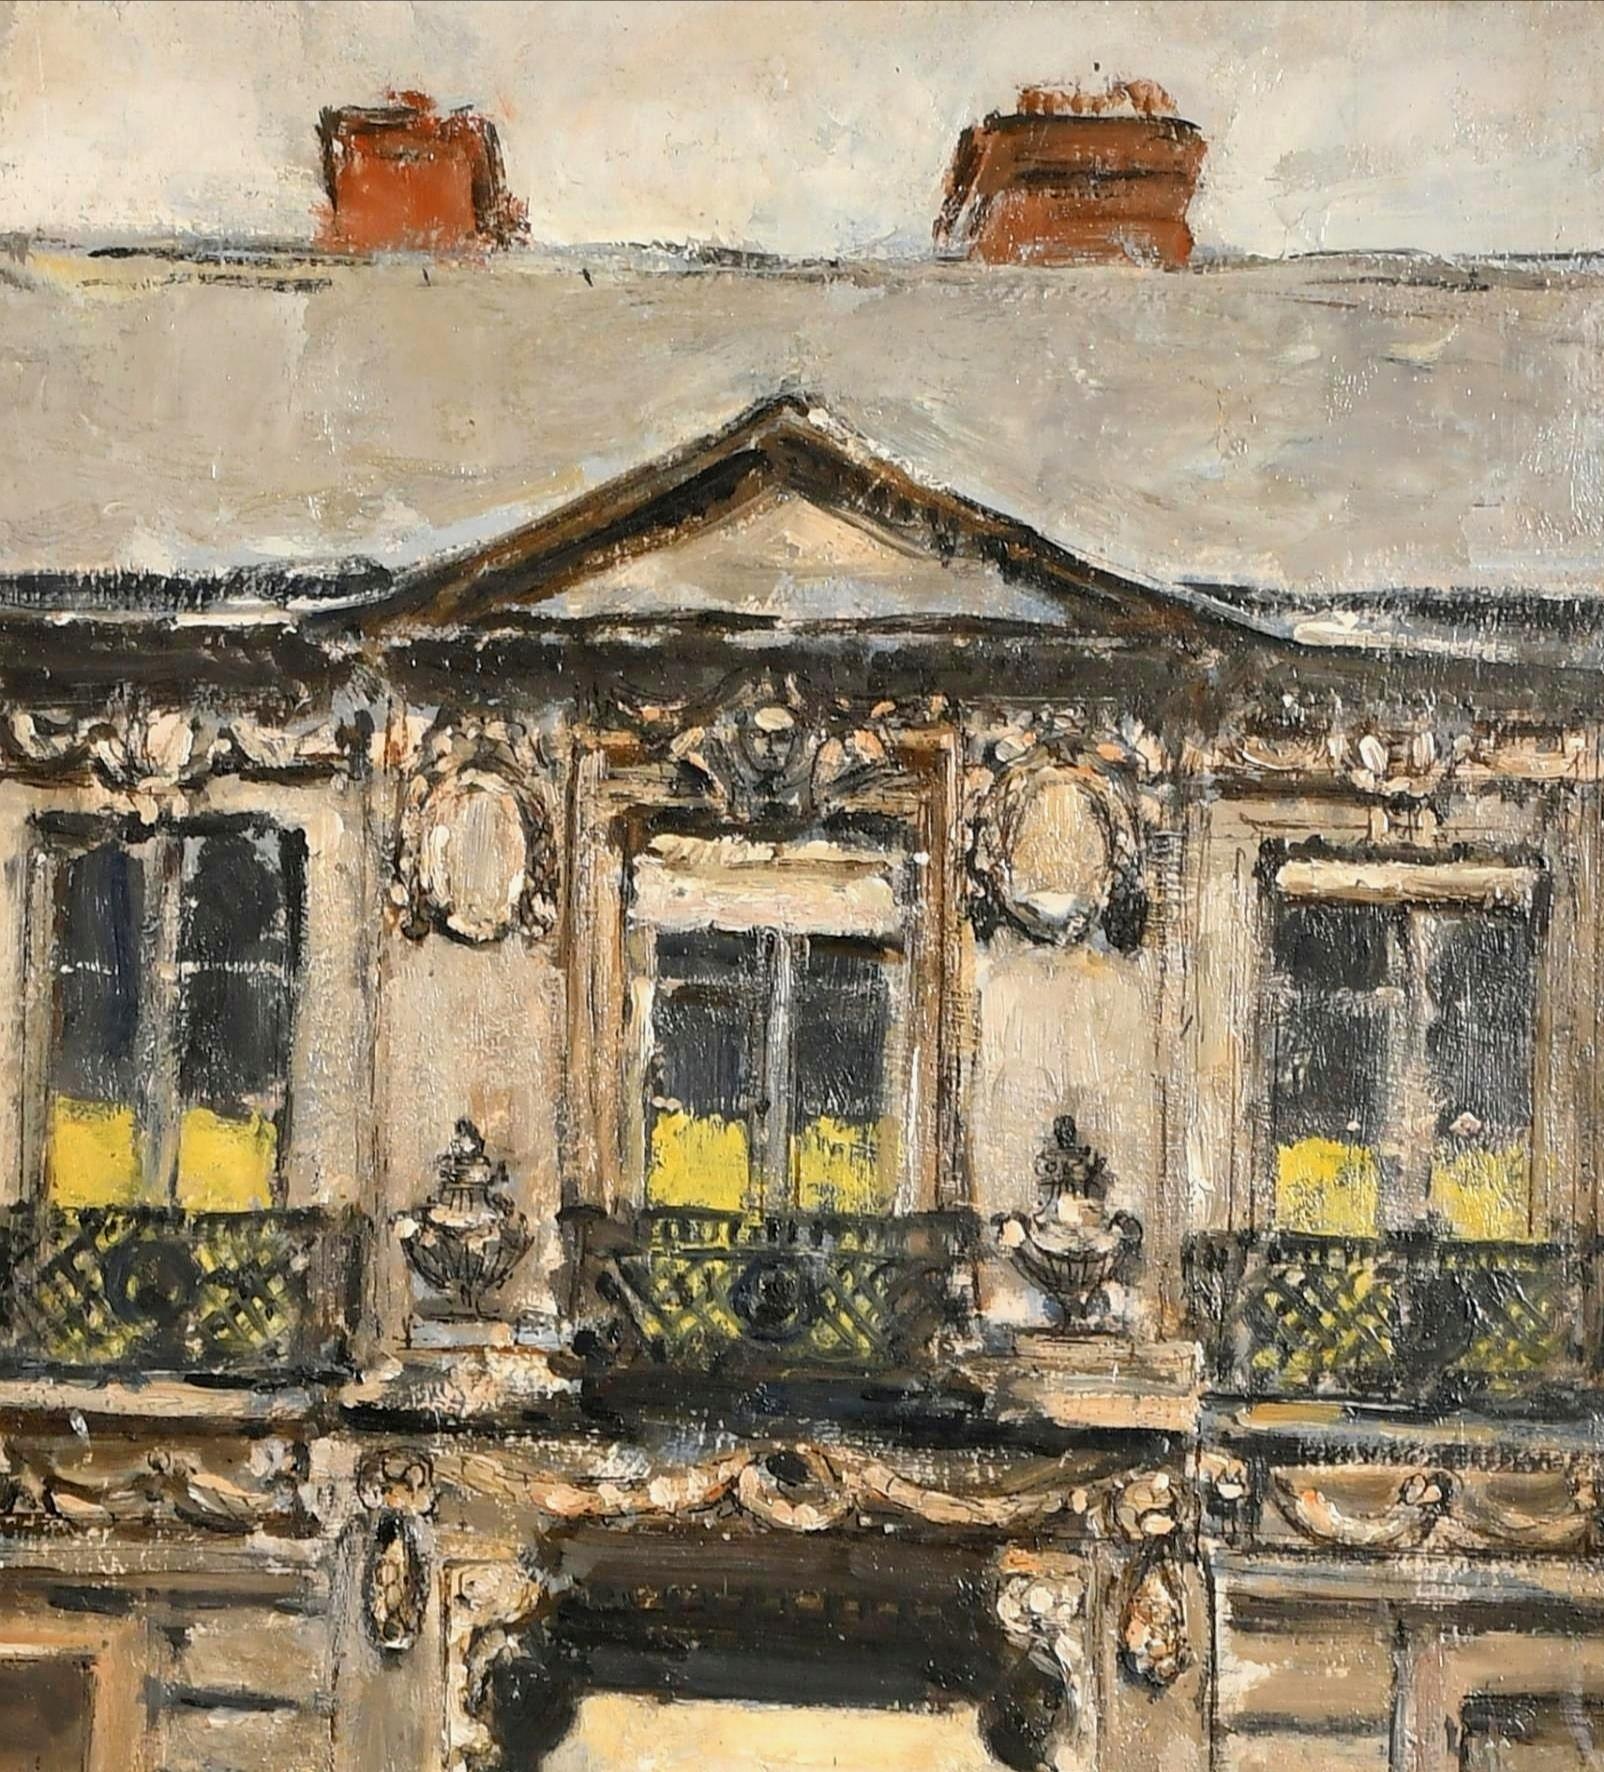 This charming oil on board by Lord Paul Ayshford Methuen RA depicts the Hotel d'Aligre at 30 Rue Damiette, Rouen in Normandy, France. The building, which is a 16th century mansion in the centre of the city, still exists today.

The painting shows